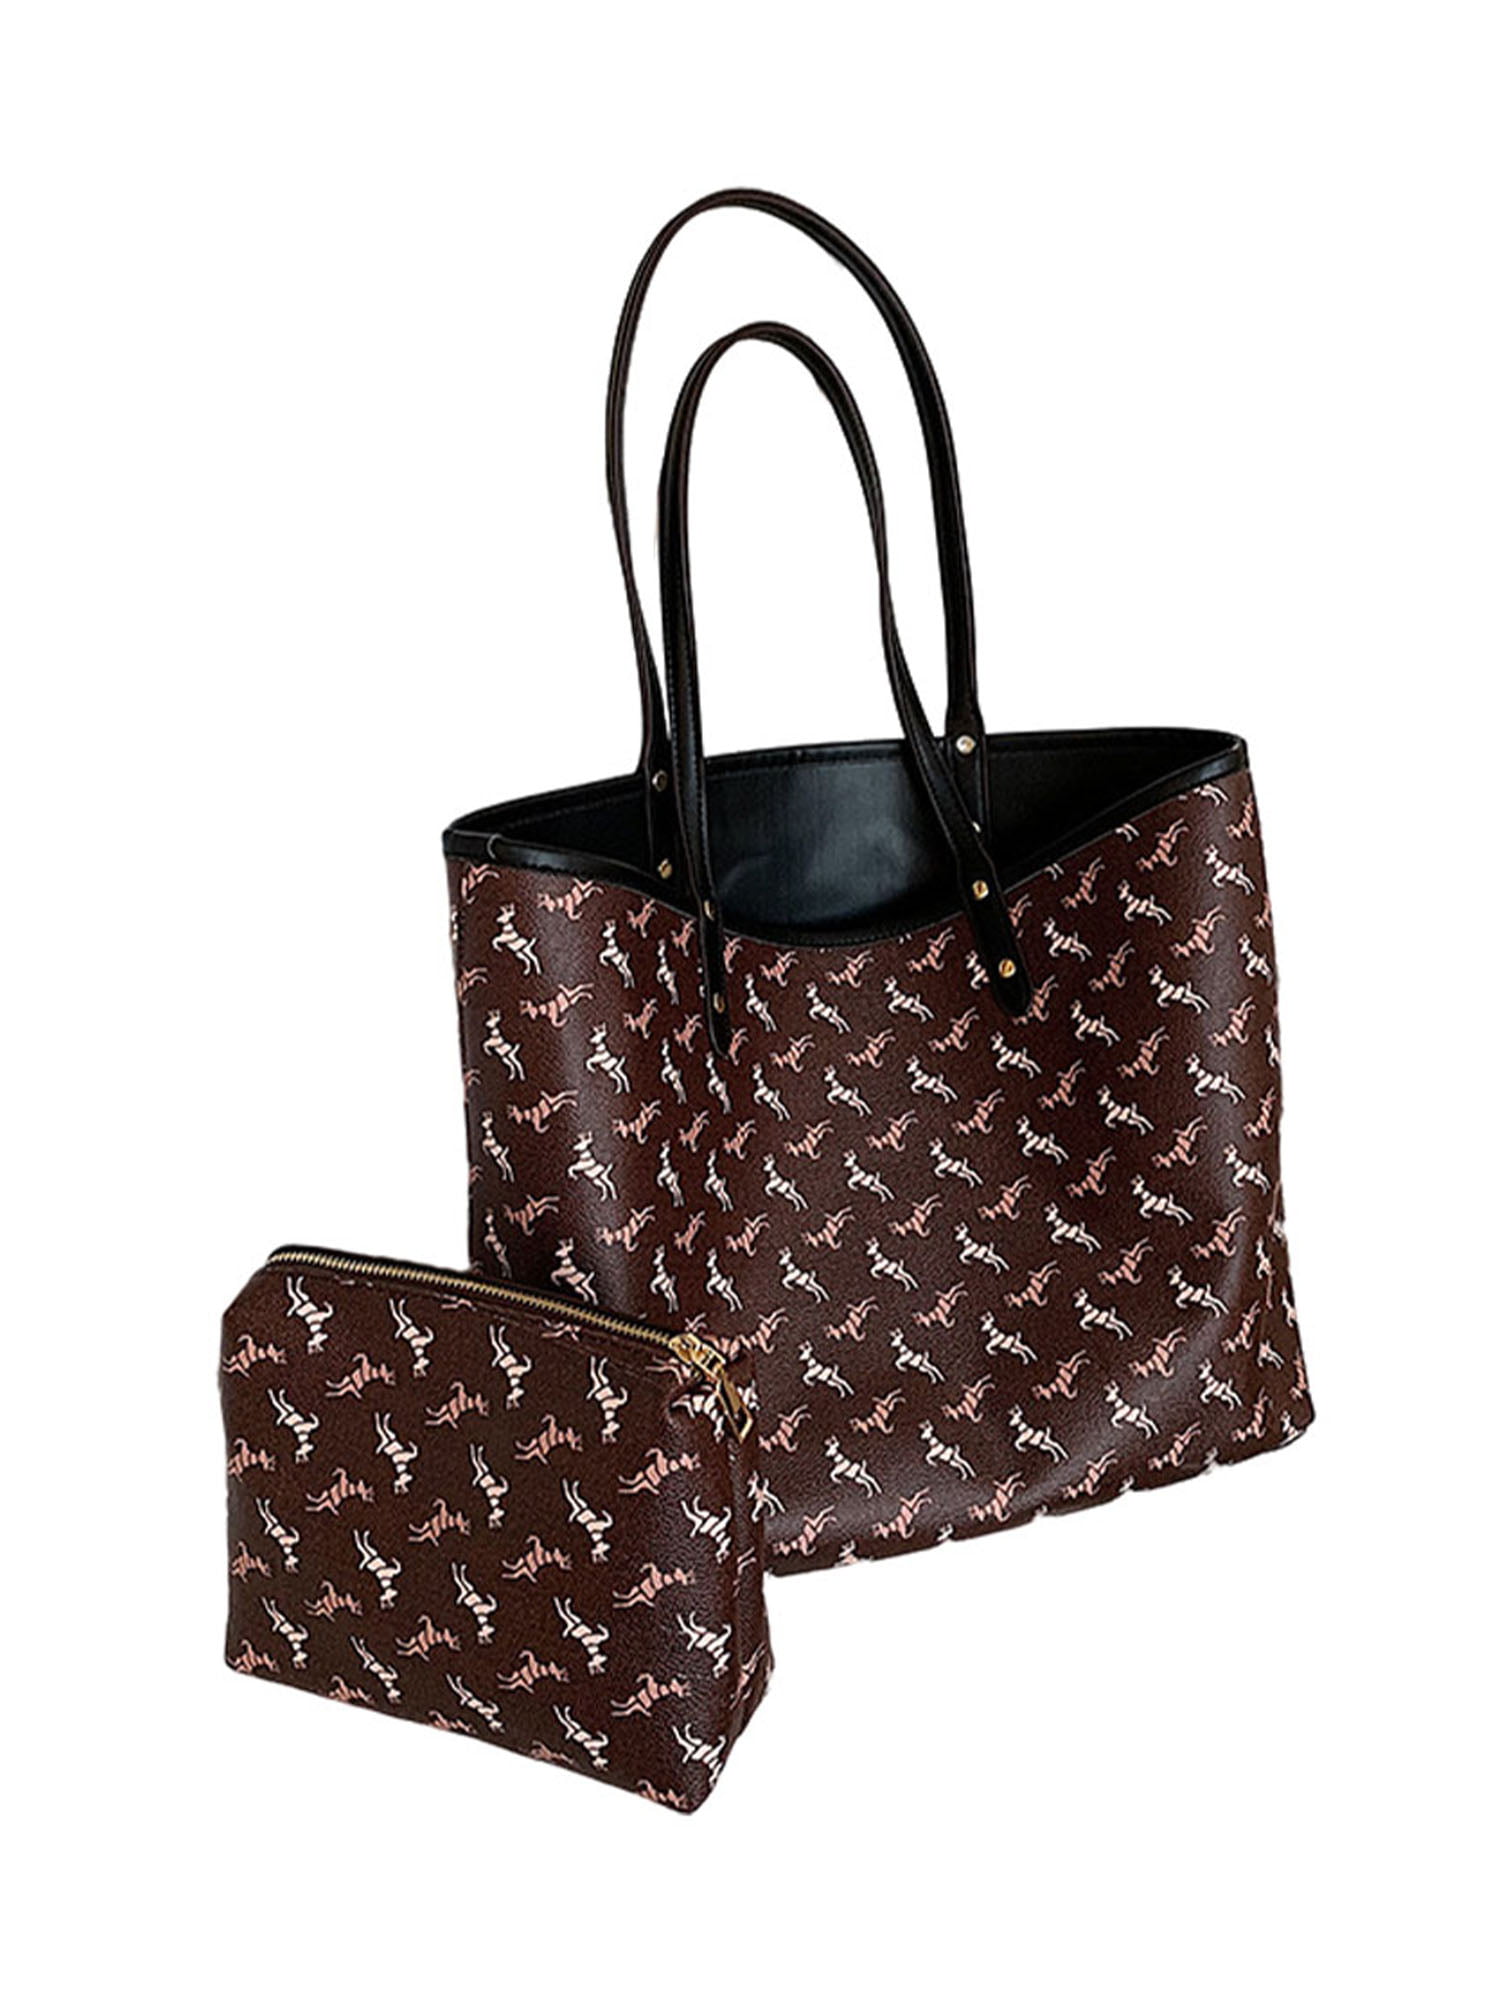 Womens Leather Print Purses and Handbags for Women Shoulder Bags